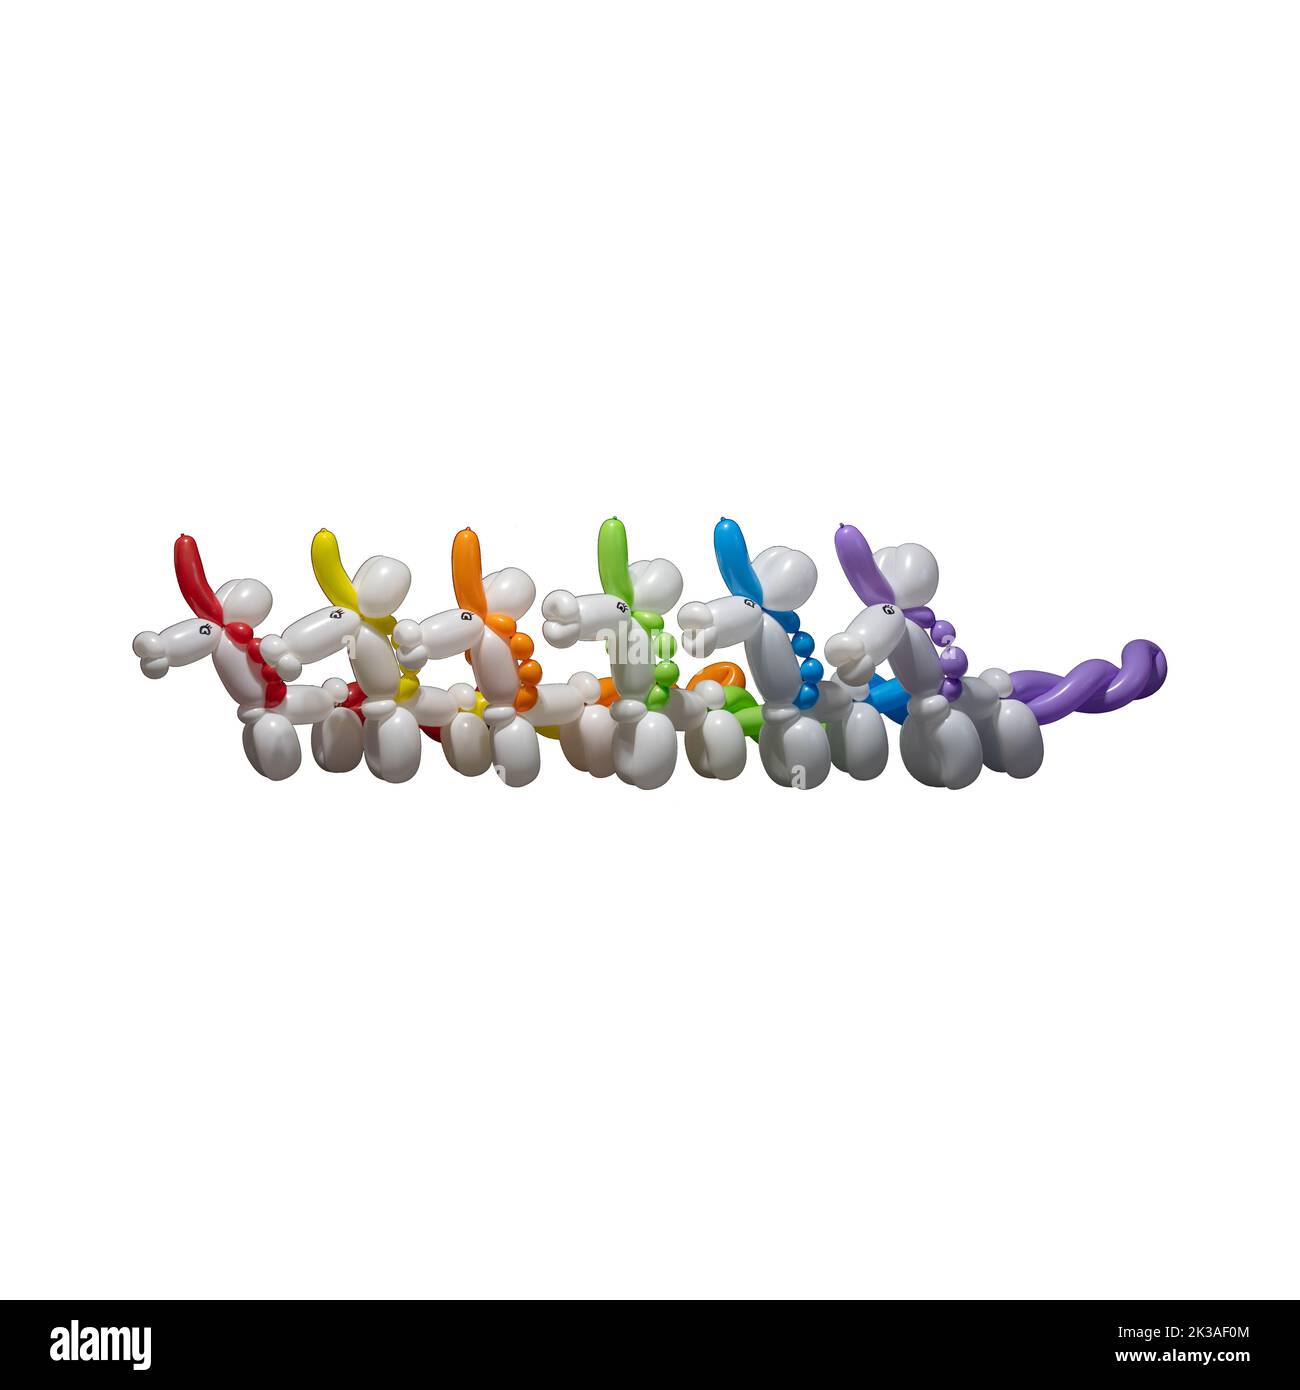 A row of cute white unicorn balloon animals with a rainbow of colorful manes, tails, and horns like a clown or entertainer might make at a birthday pa Stock Photo